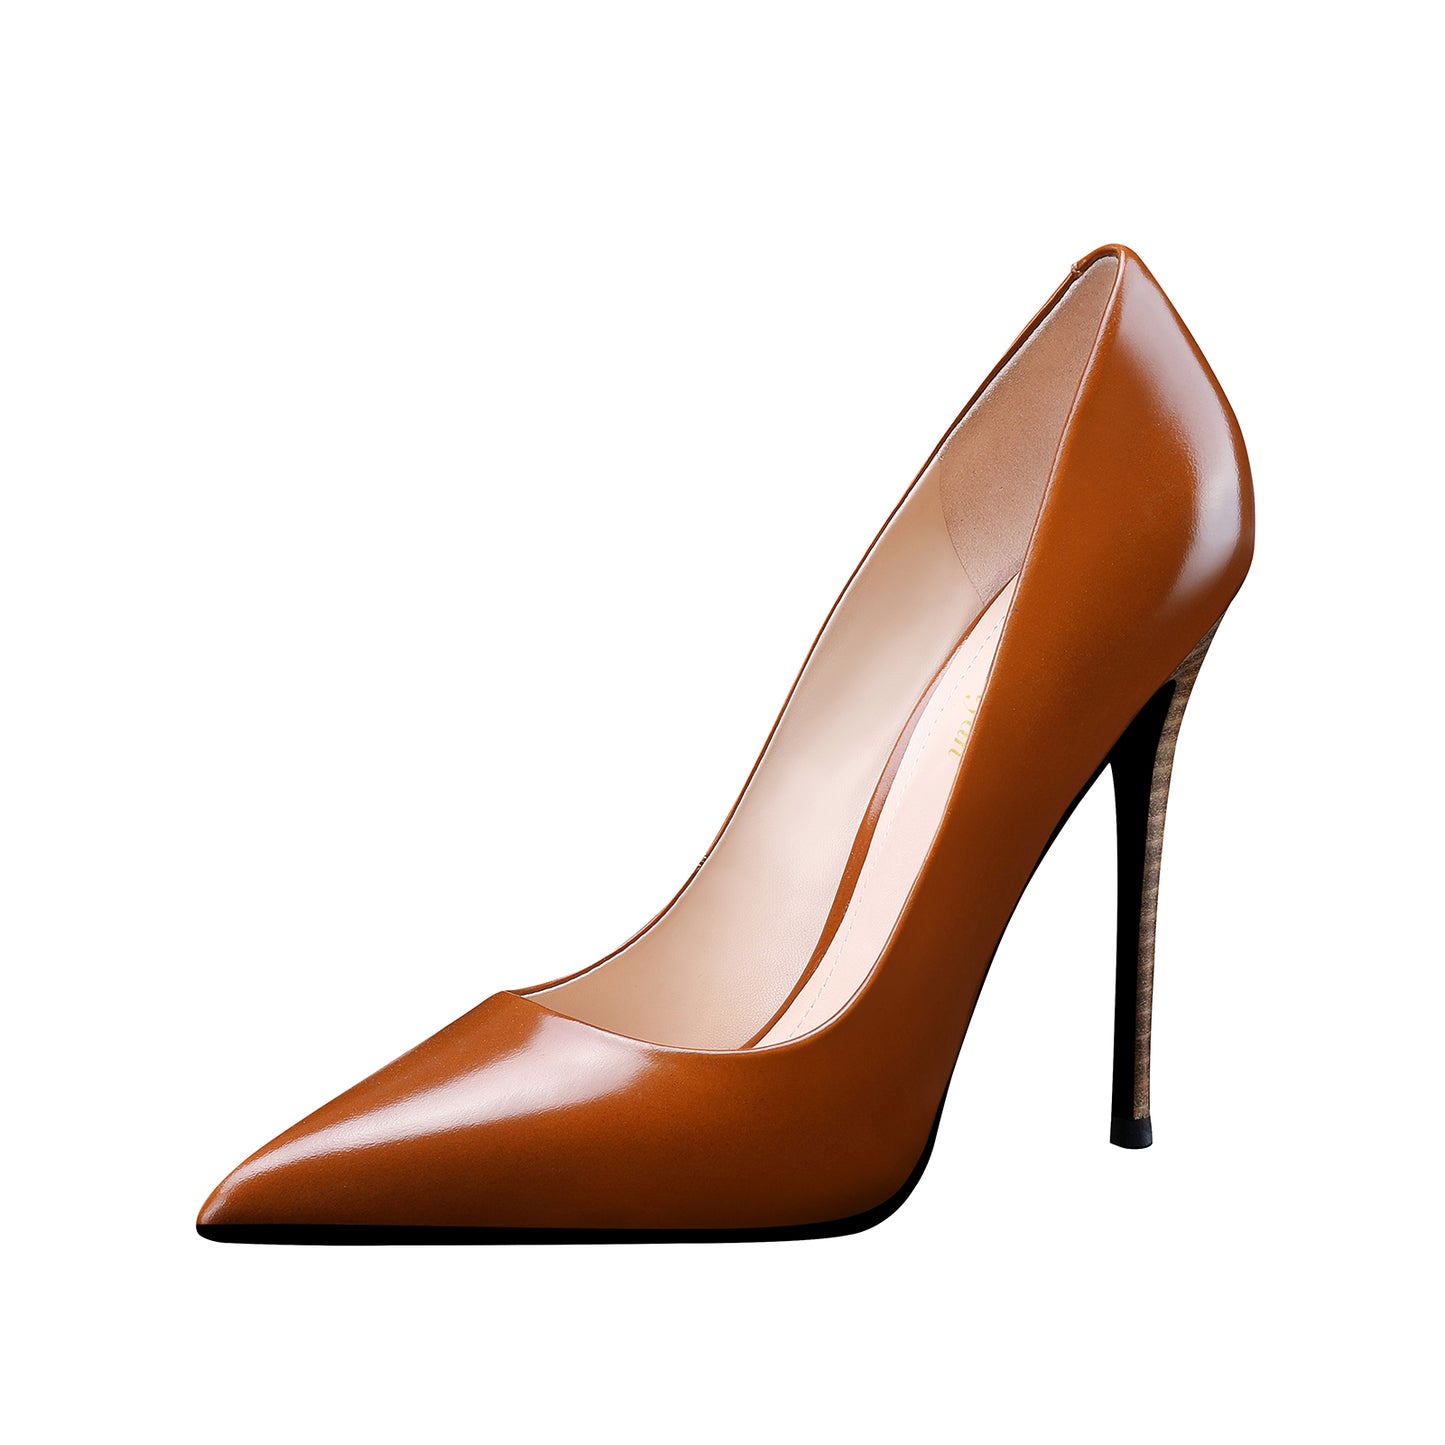 Slip-On Stiletto Pumps with Pointed Toe Leather High Heel